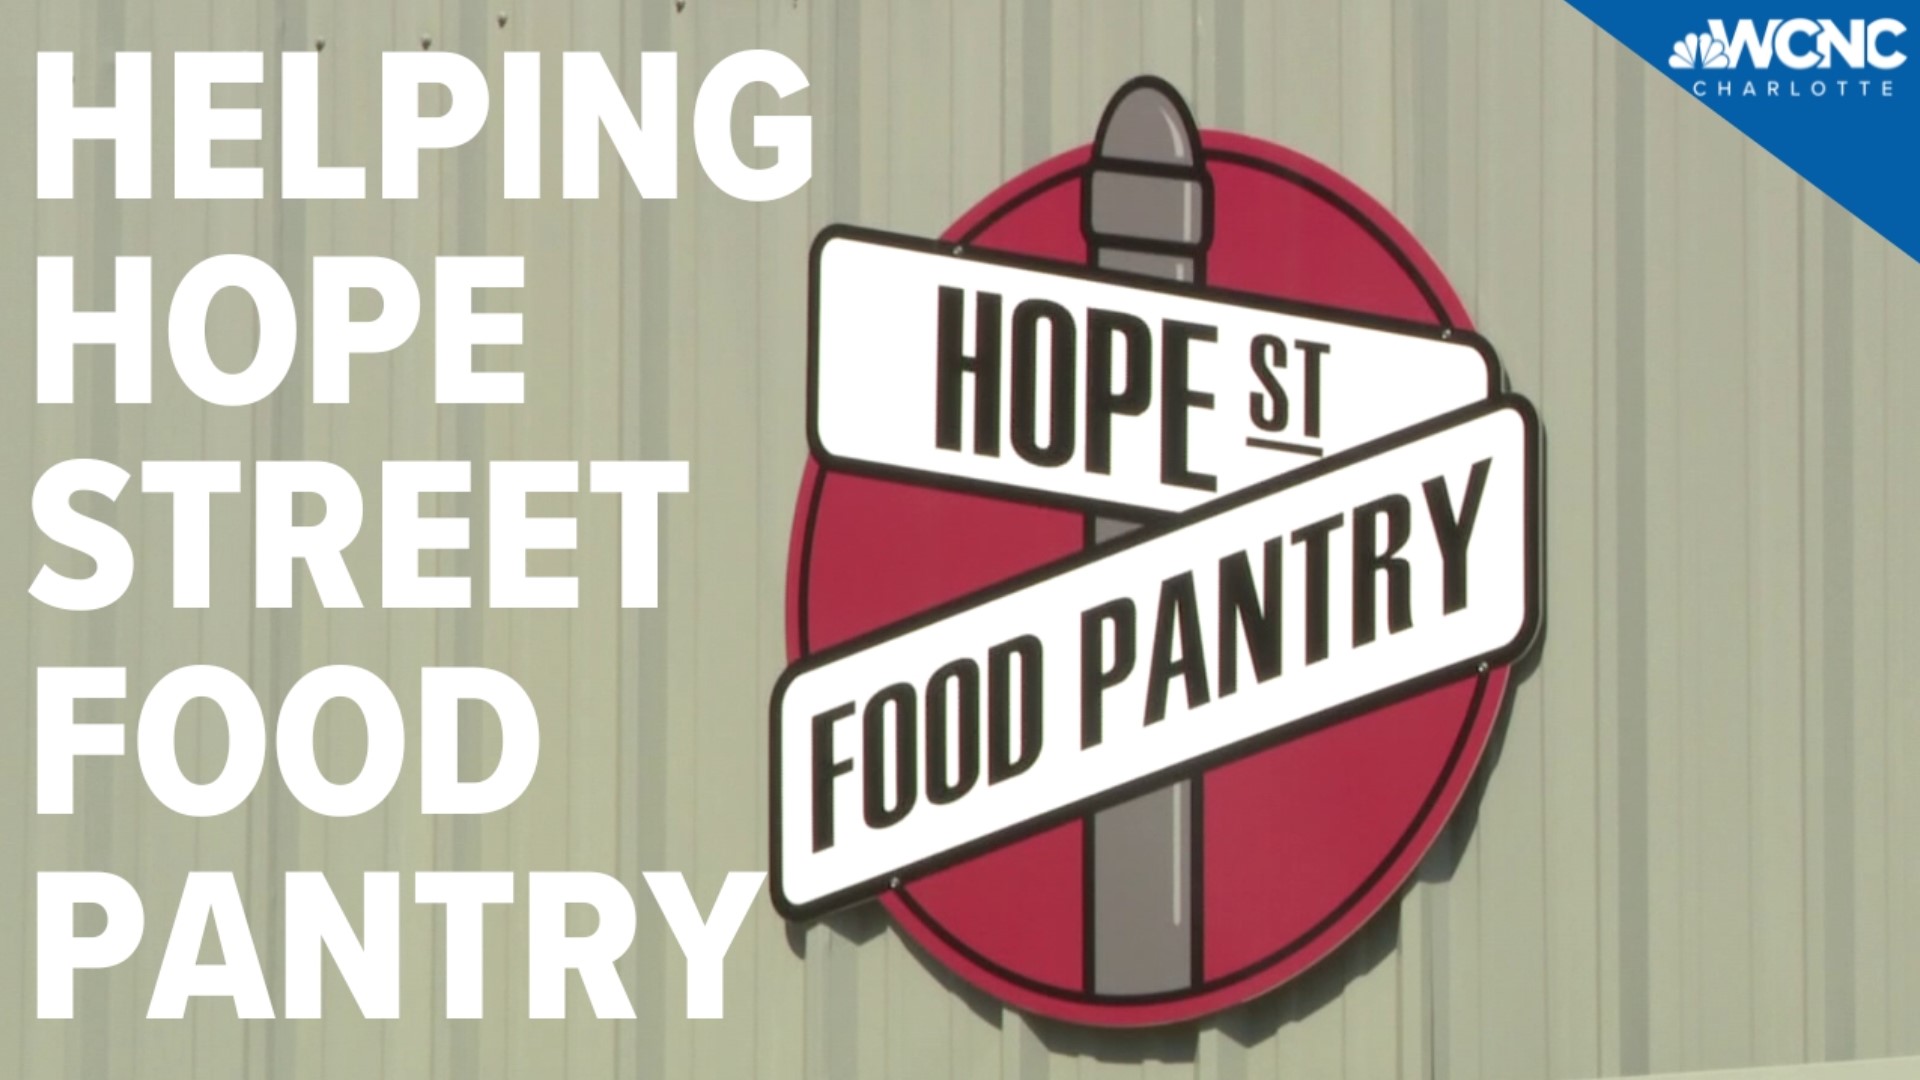 Hope Street Food Pantry is collecting donations as they gear up to feed 300 families during Thanksgiving week.